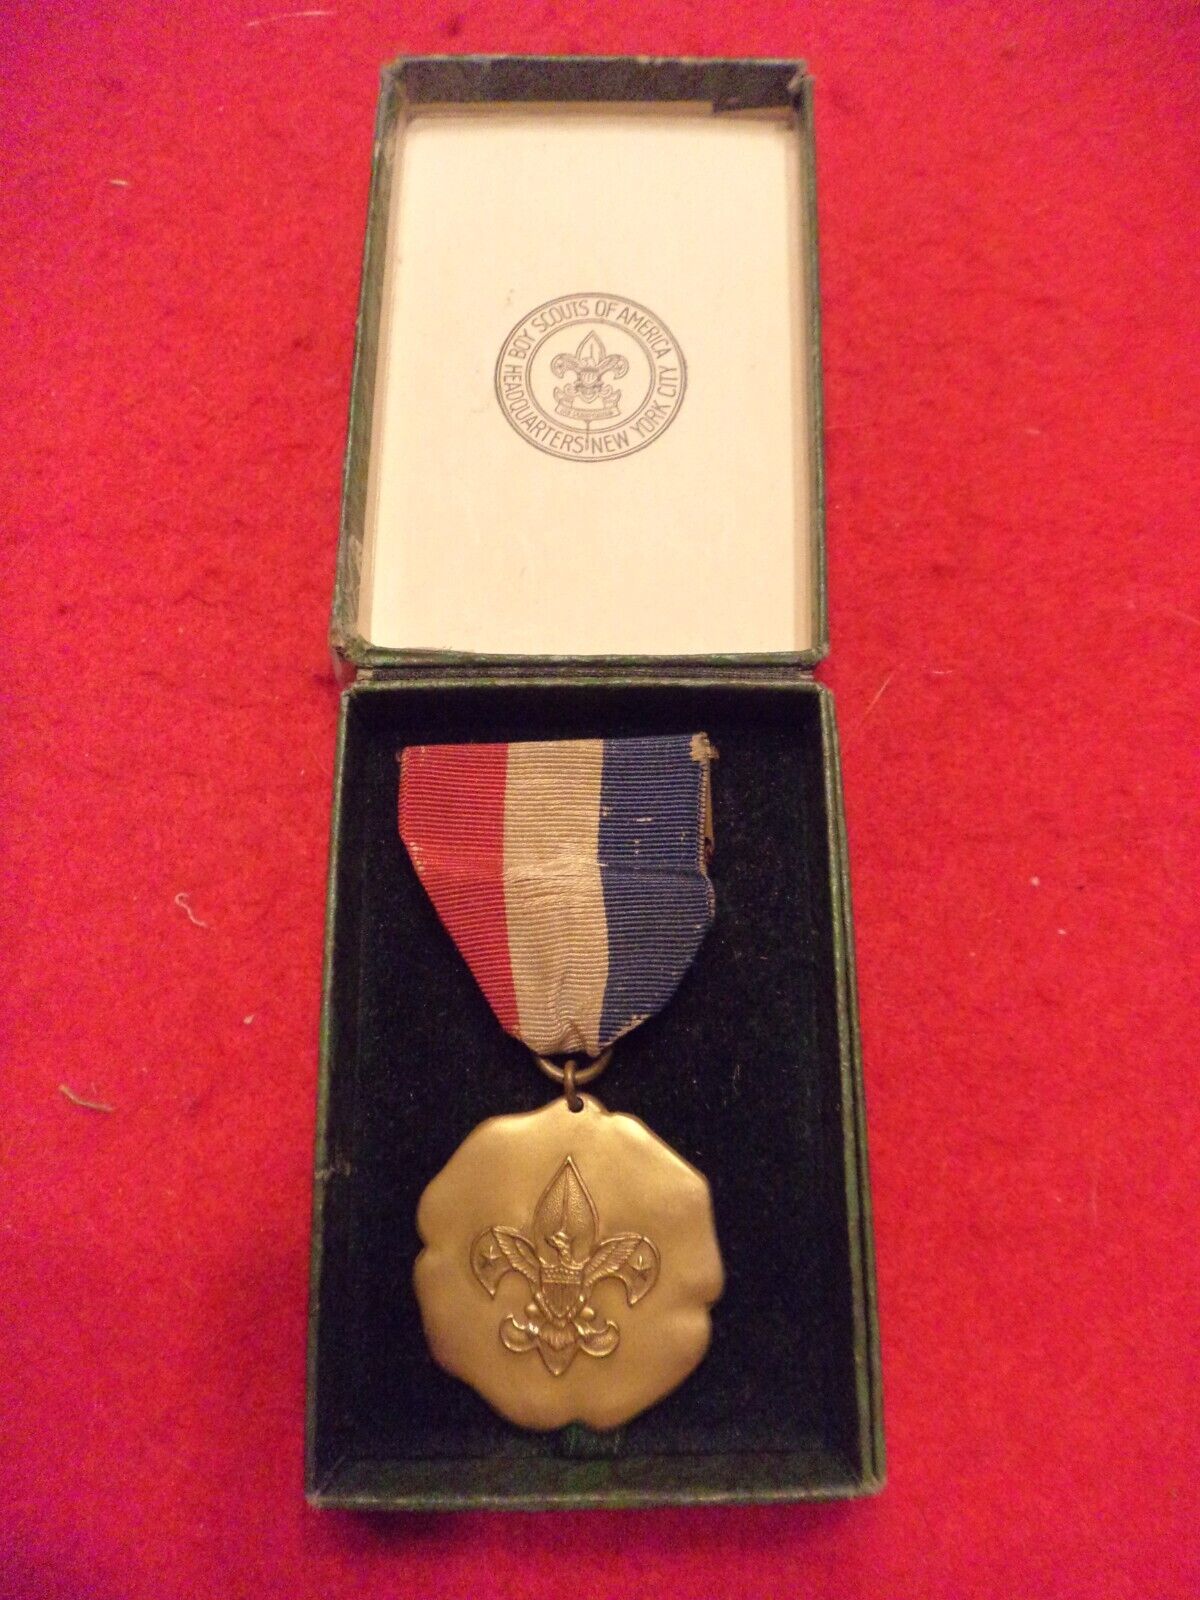 *****SUPER RARE 1925 RED/WHITE/BLUE  GOLD SCALLOPED CONTEST MEDAL & DISPLAY BOX